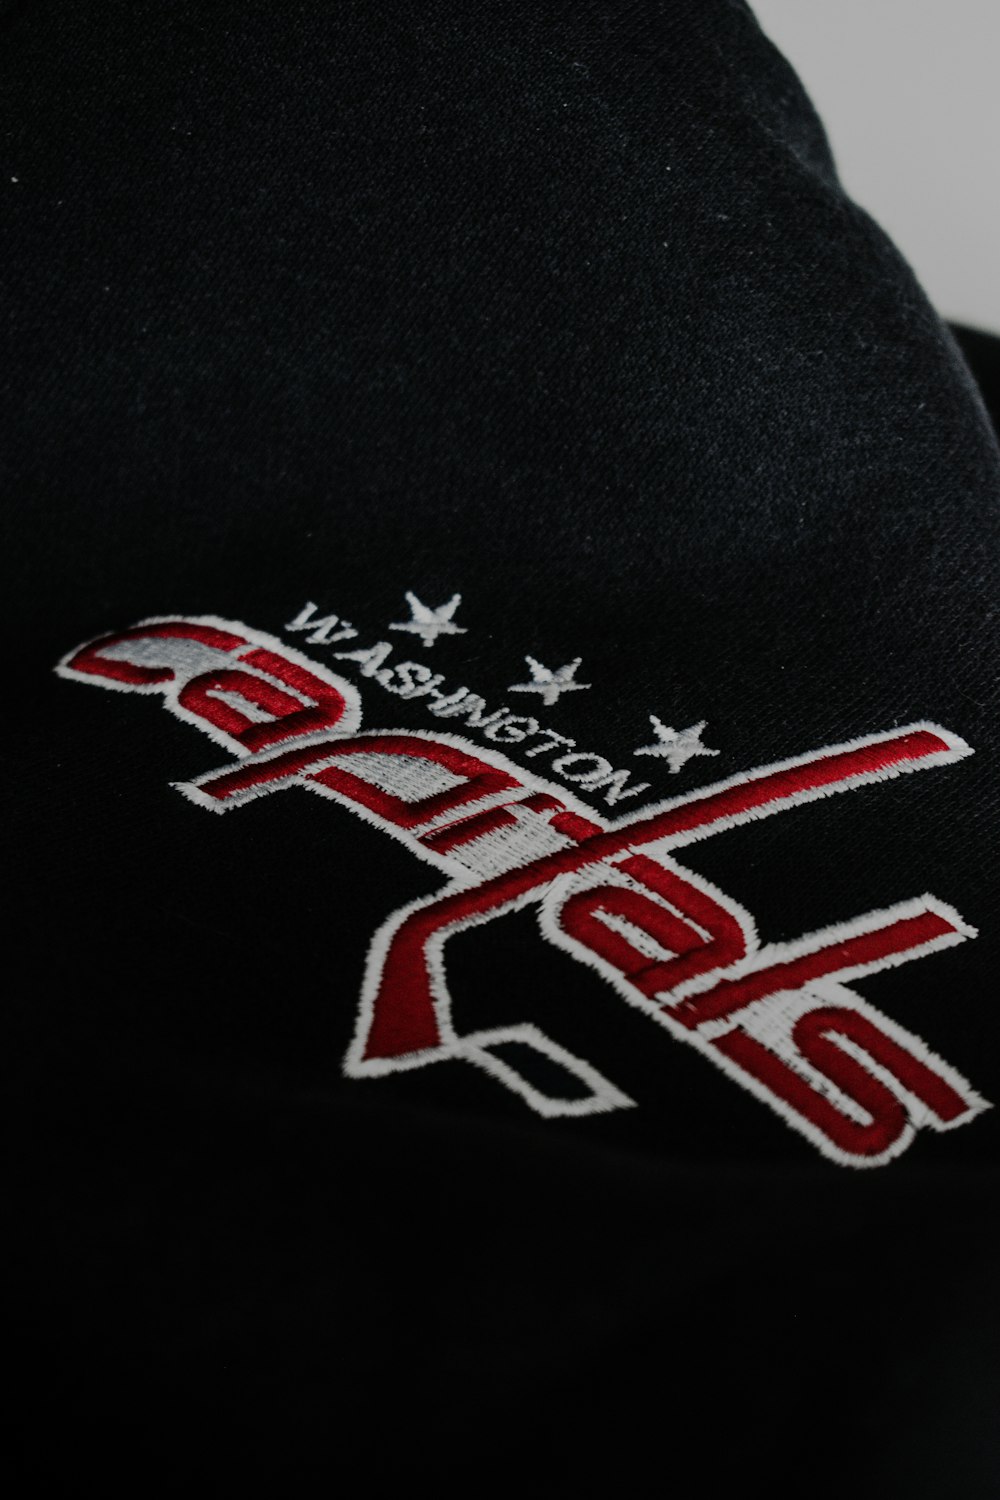 a black hat with a red and white logo on it